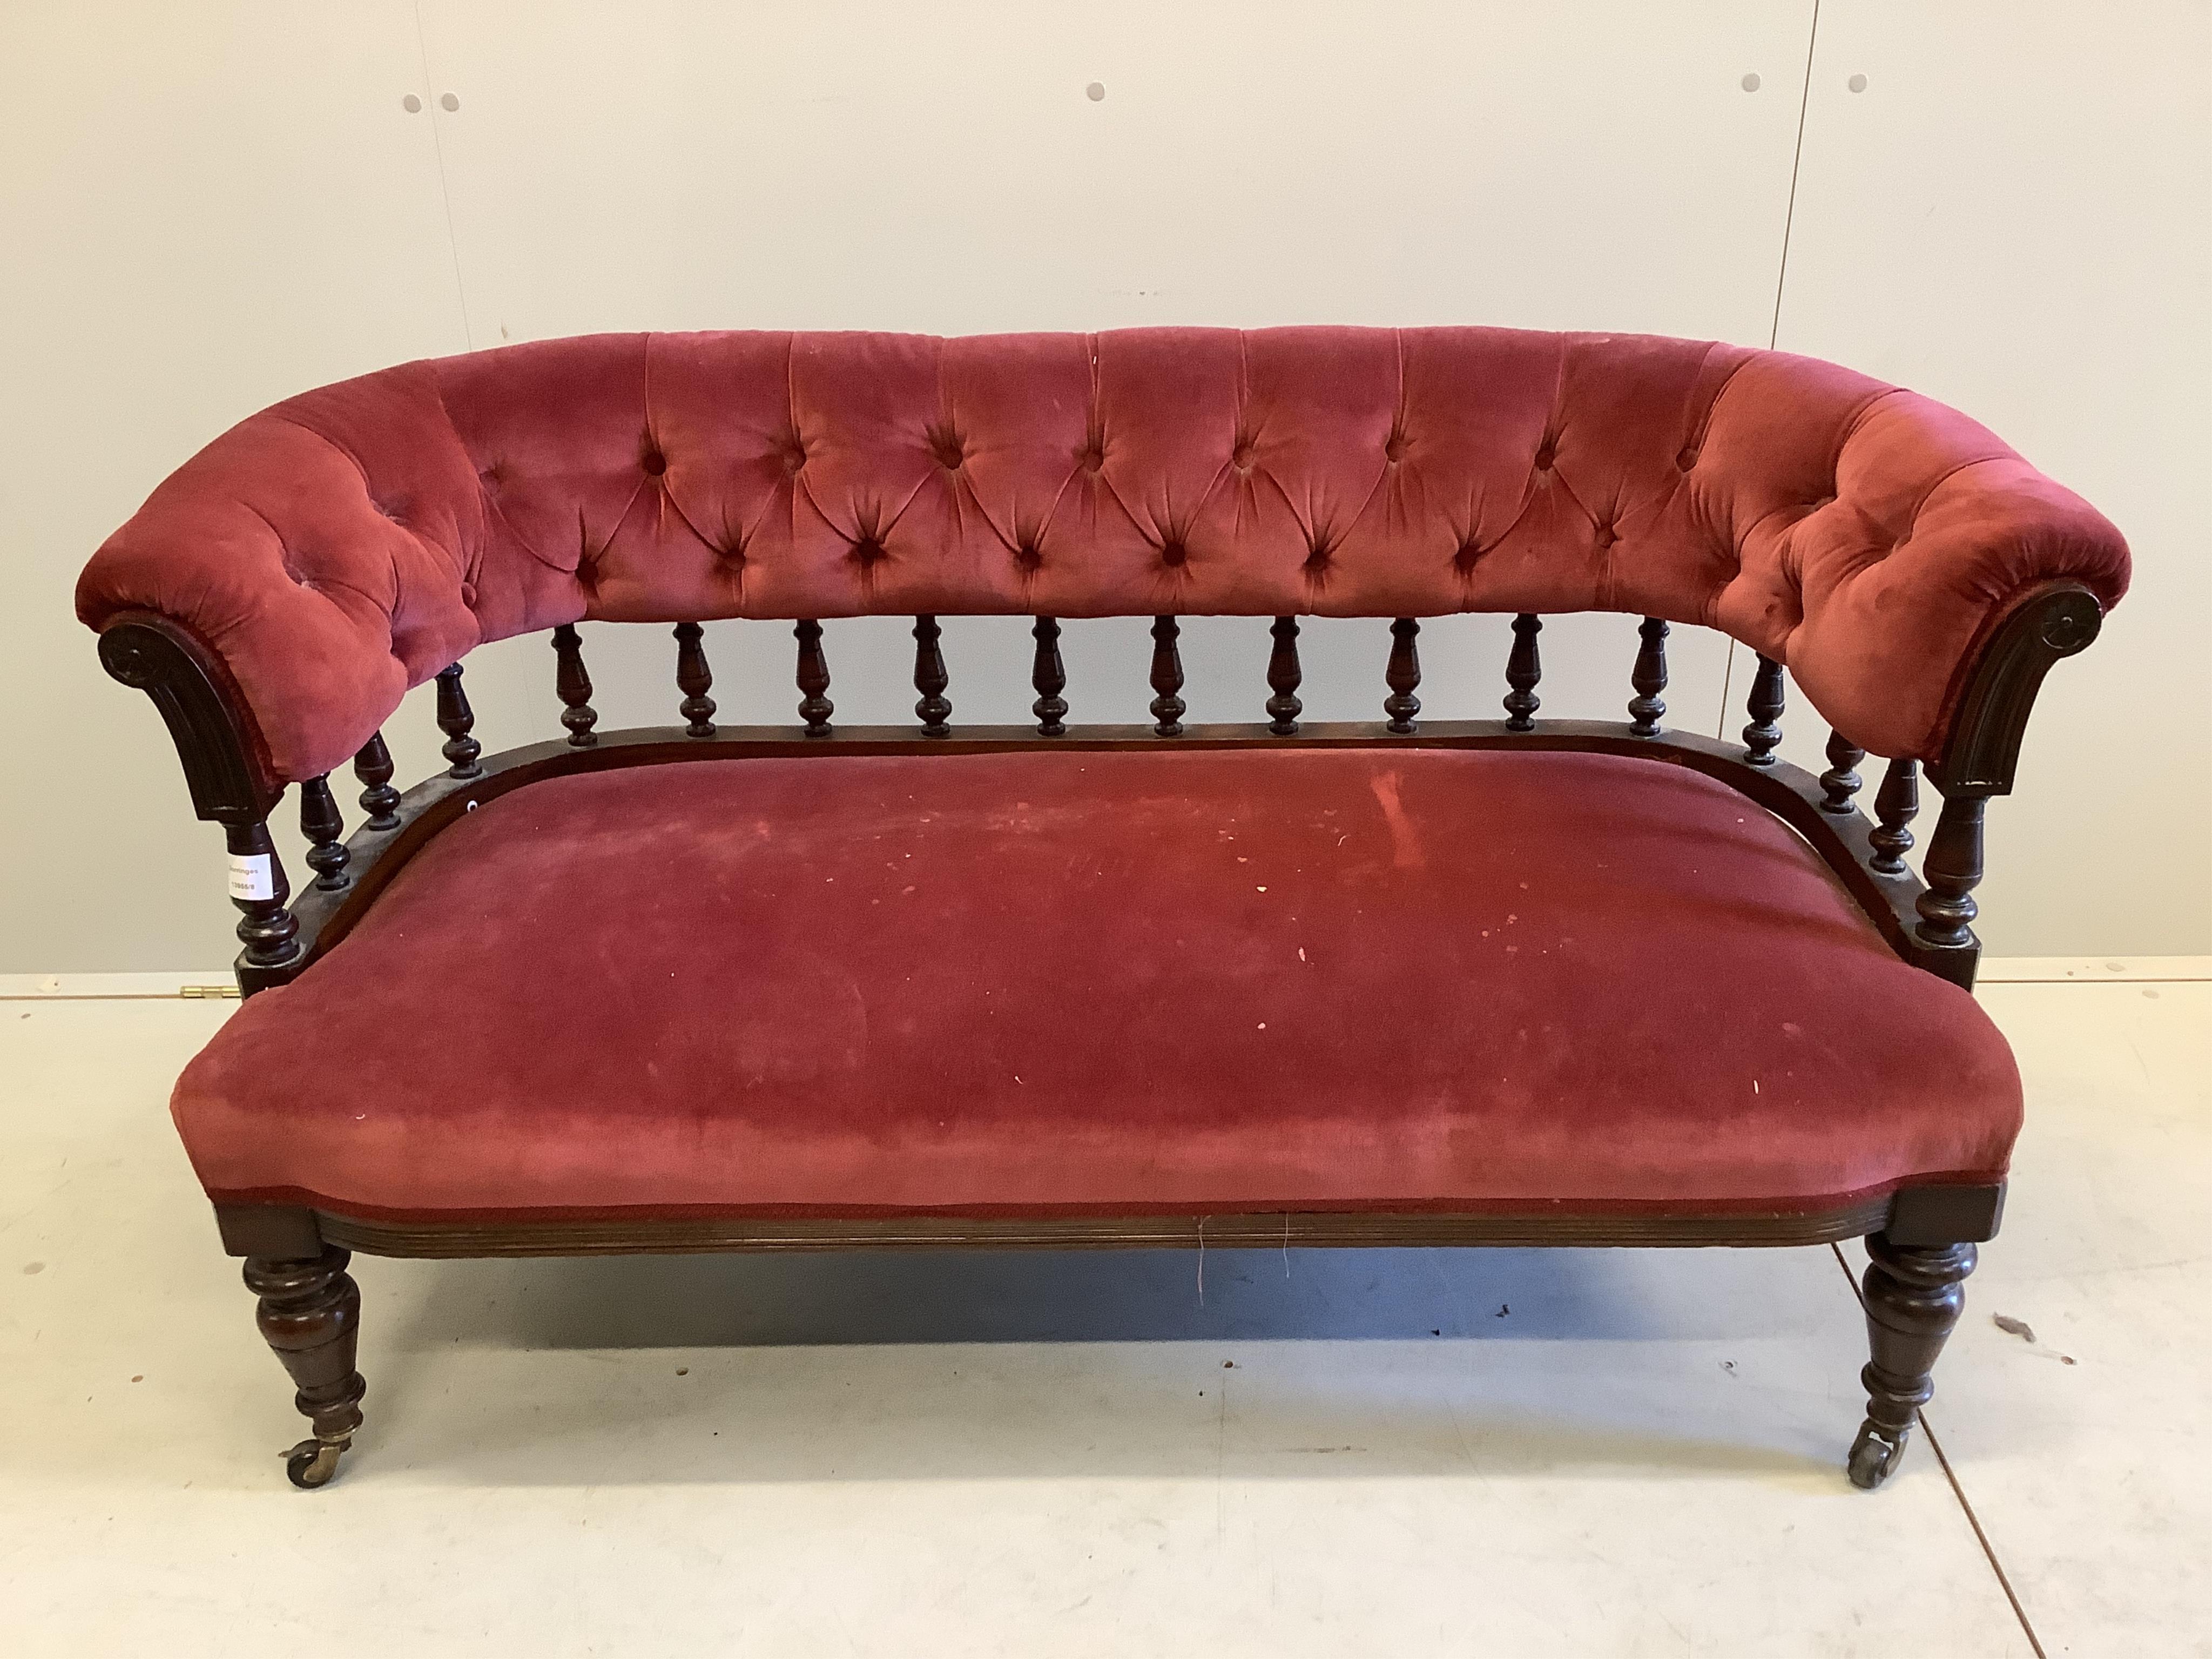 A late Victorian mahogany upholstered settee, width 132cm, depth 56cm, height 70cm. Condition - fair